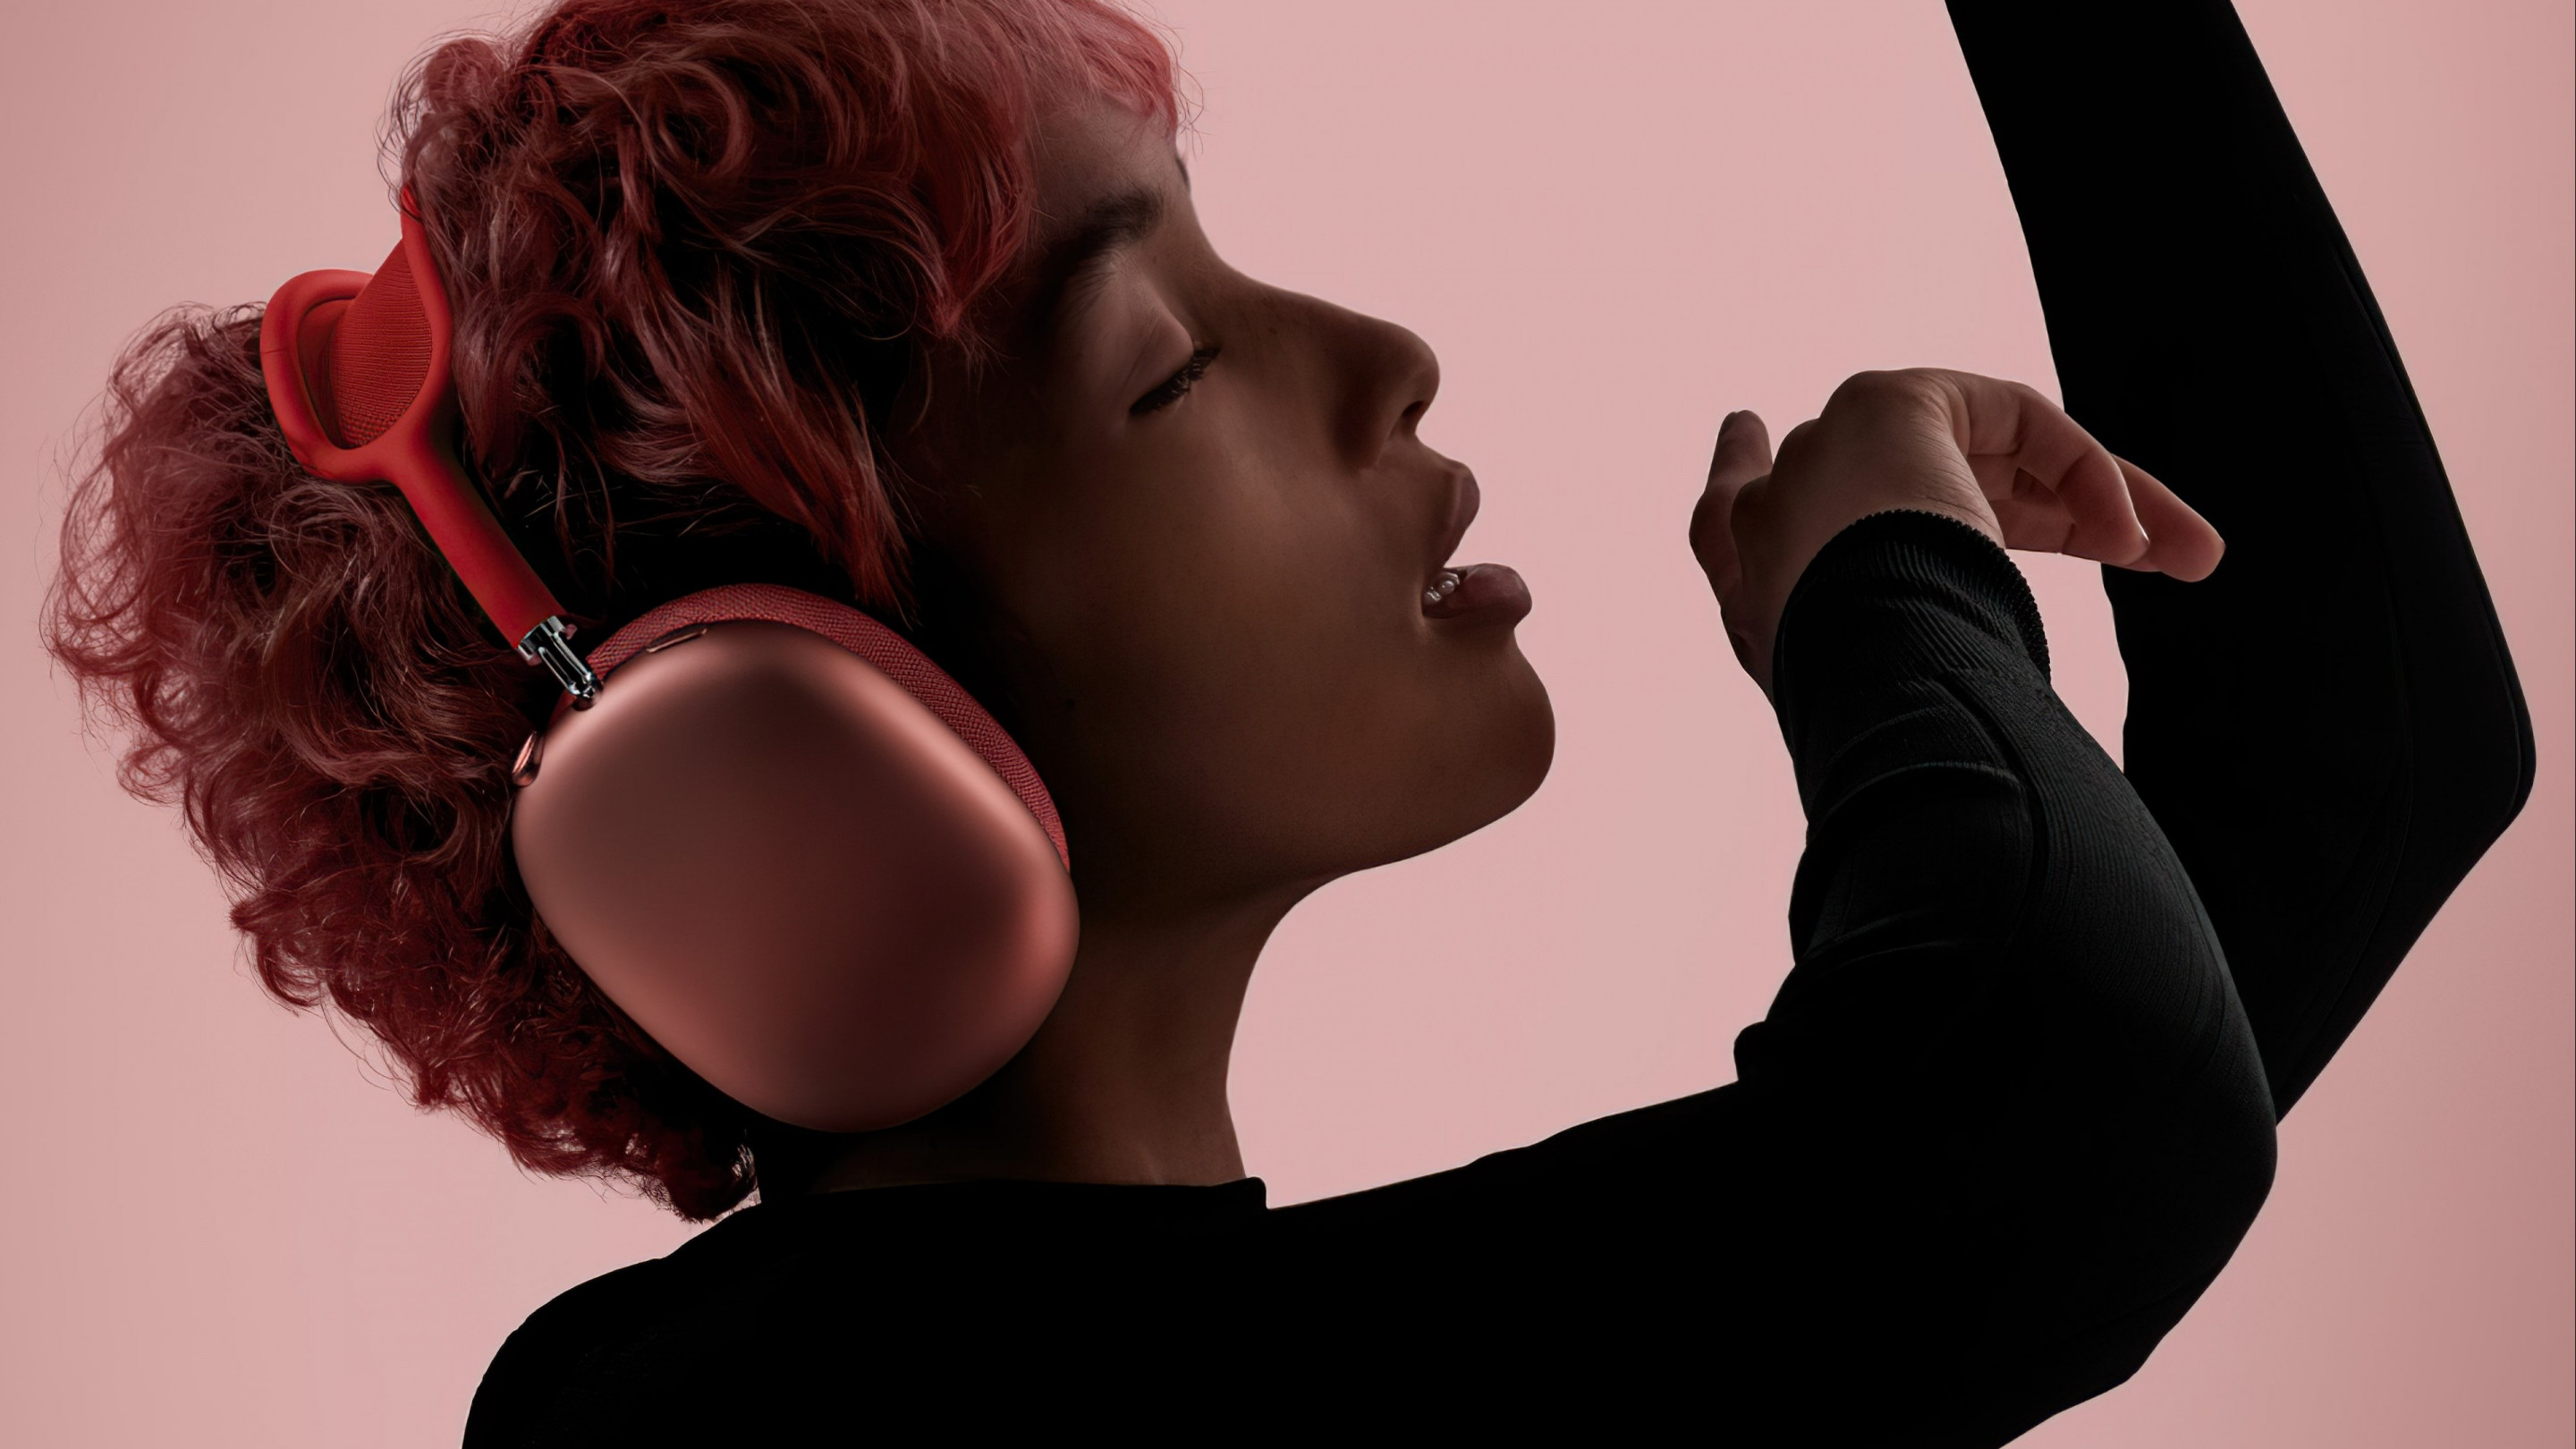 Lady with AirPods Max wallpaper 2880x1620